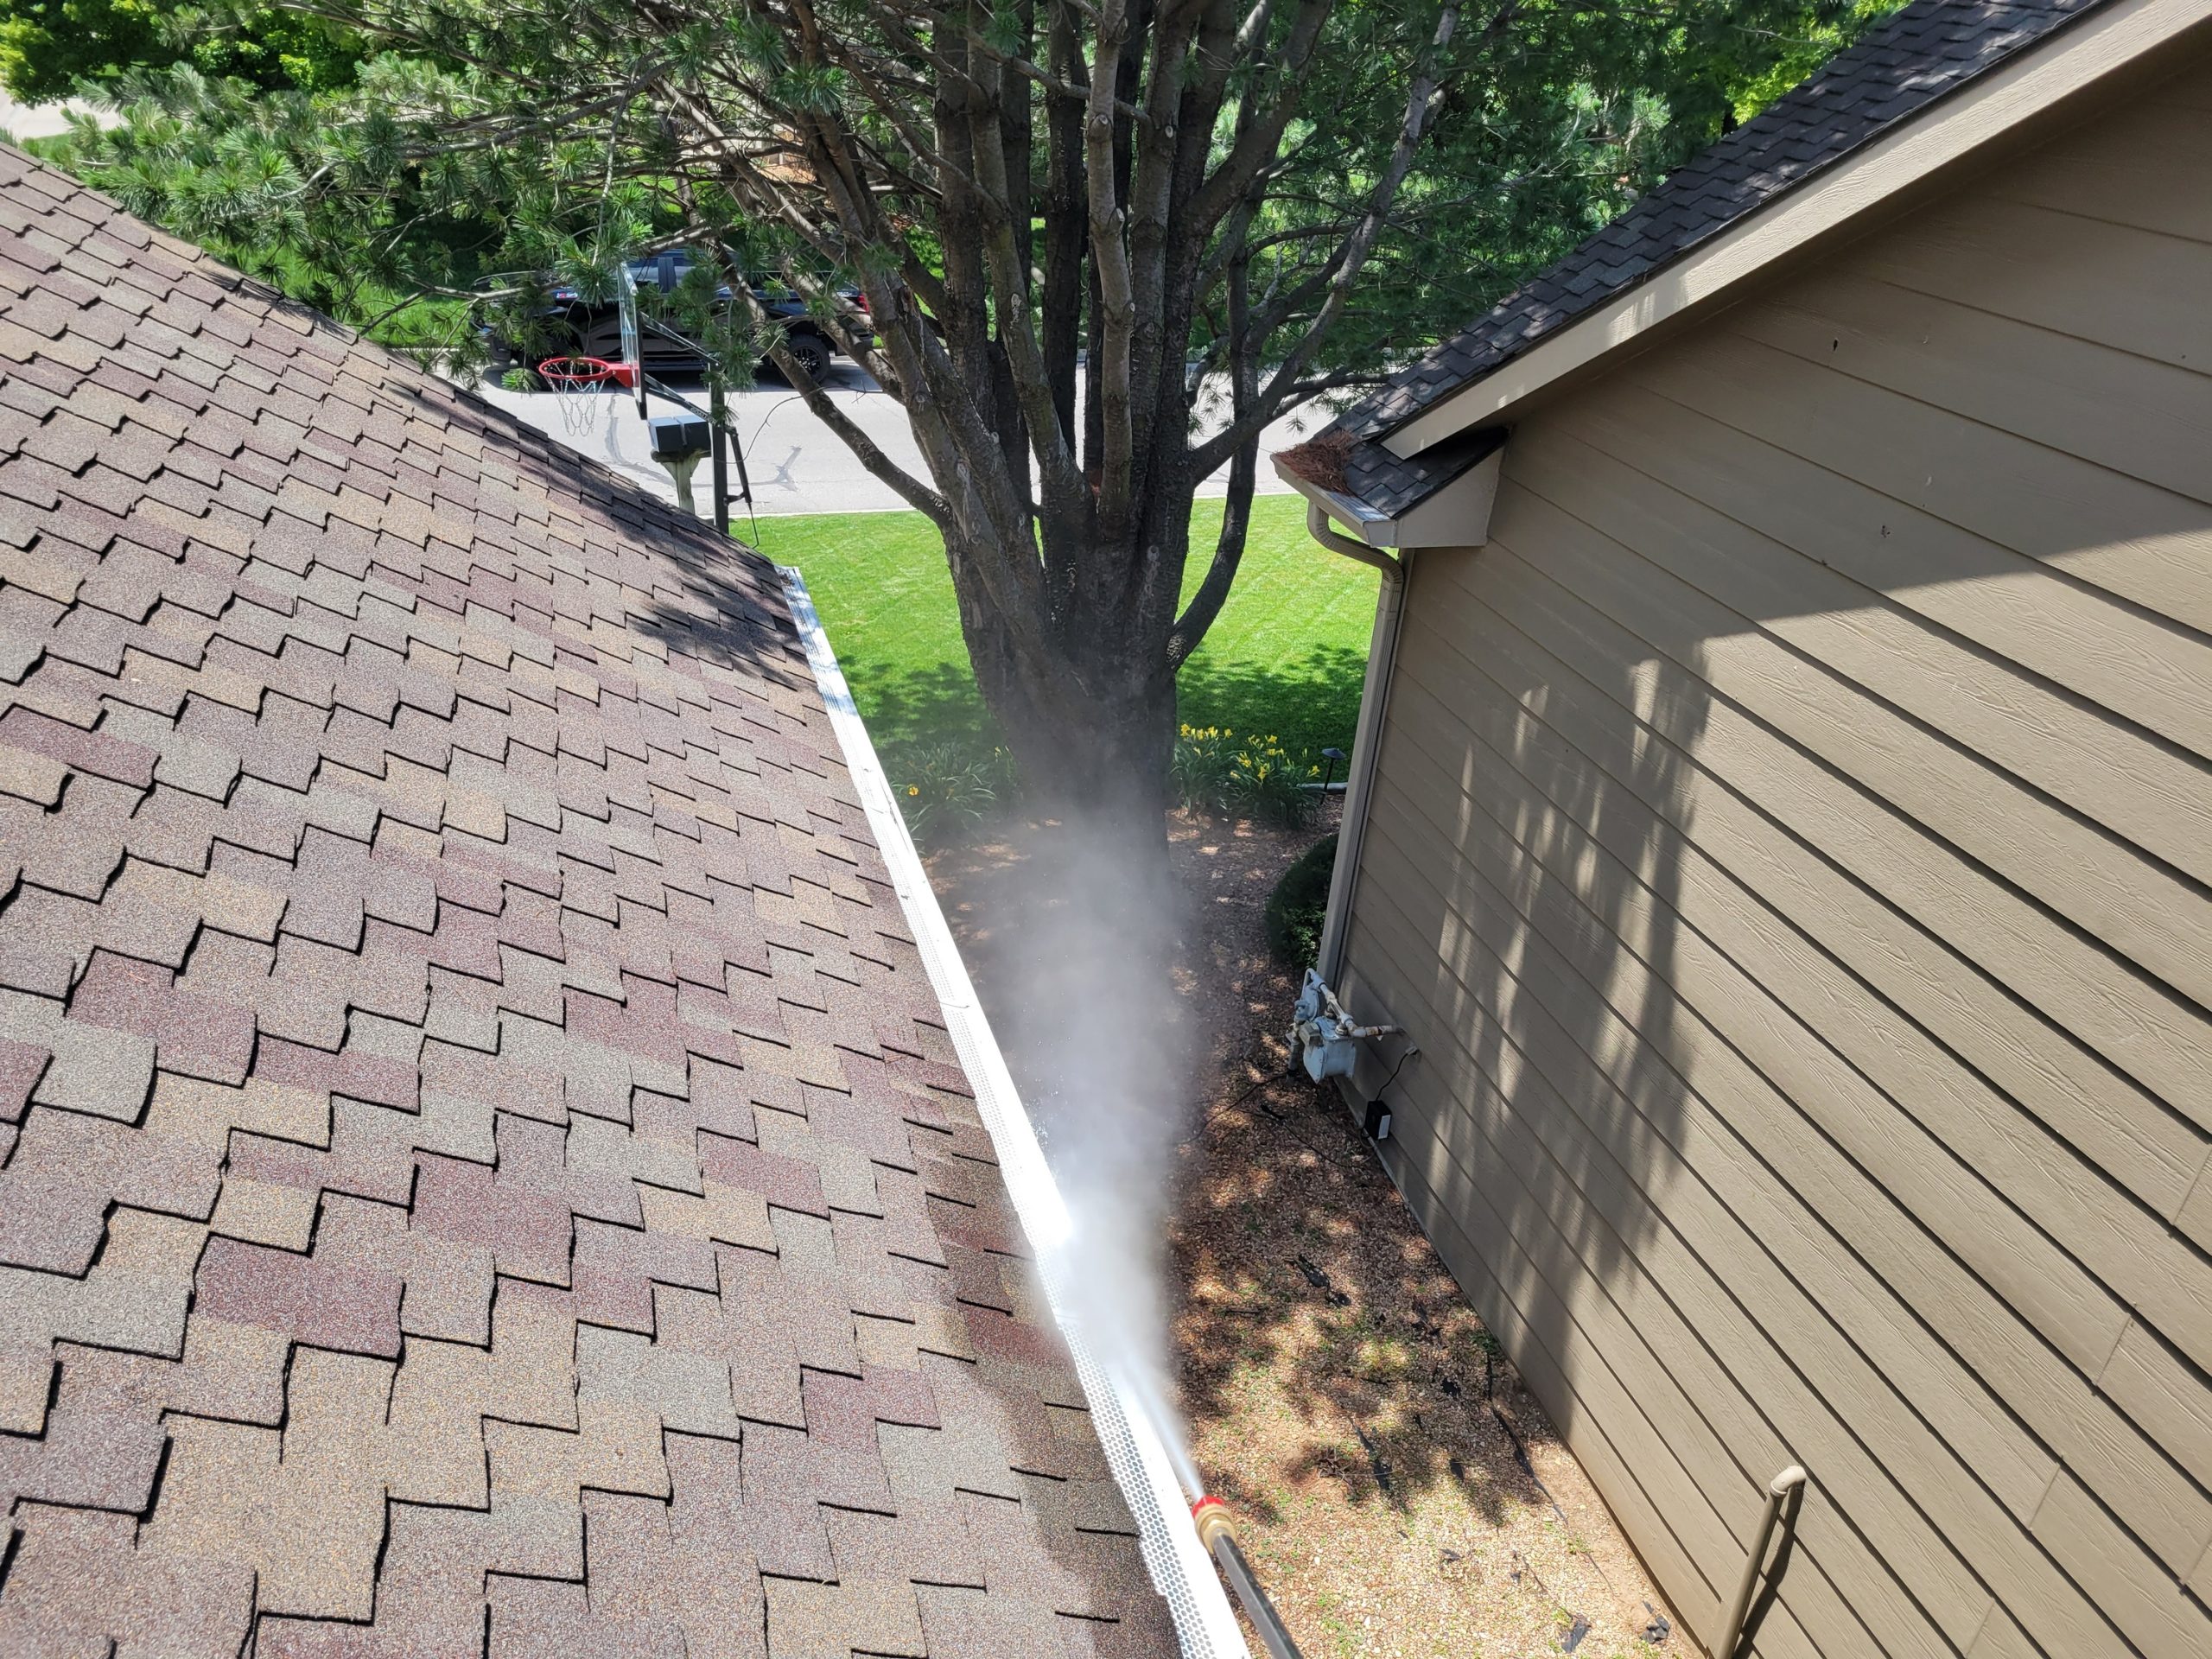 Completed Gutter Cleaning in Lexington, KY for Deirdre's Home